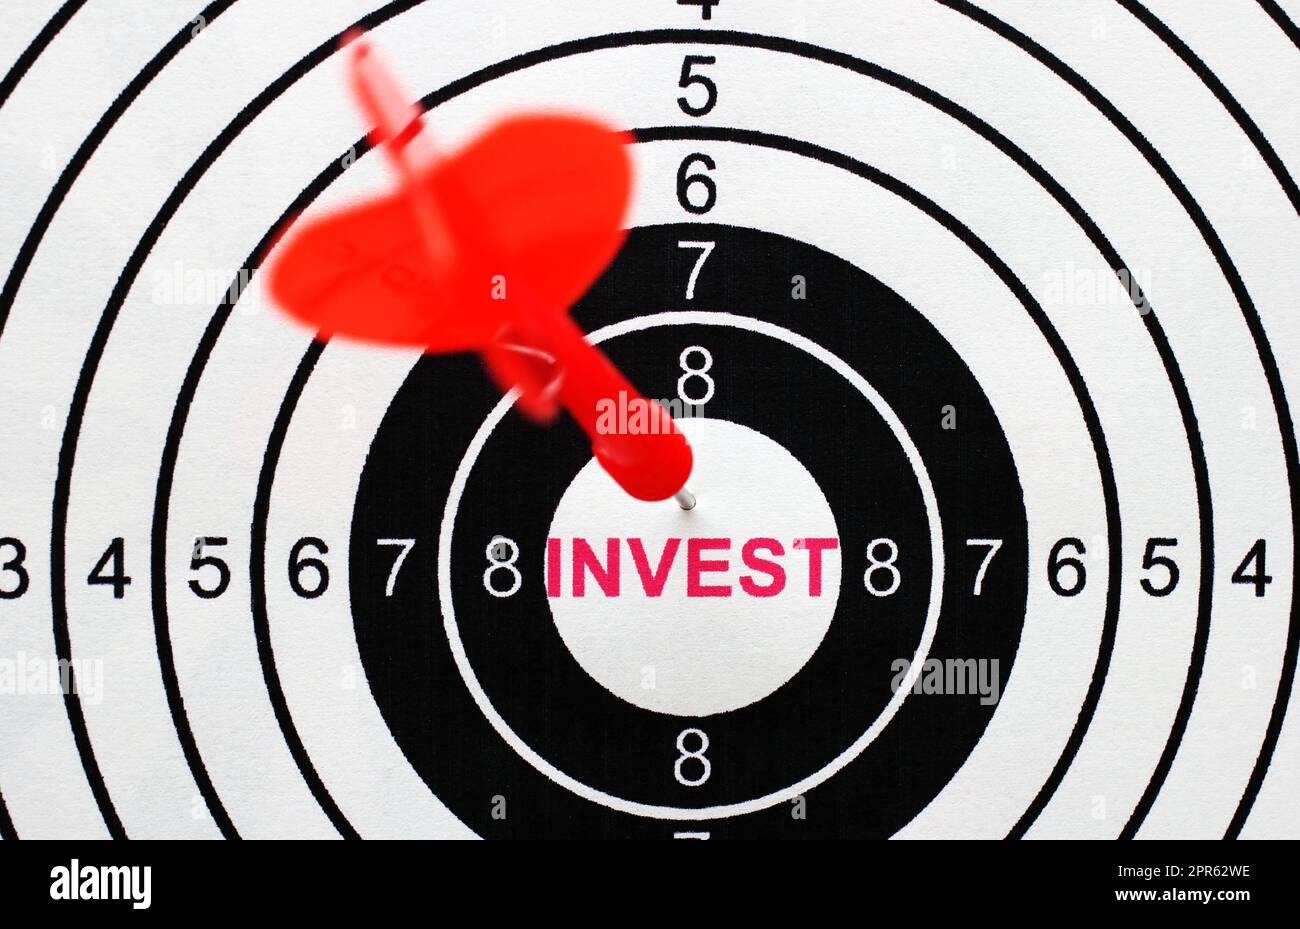 Invest target concept Stock Photo